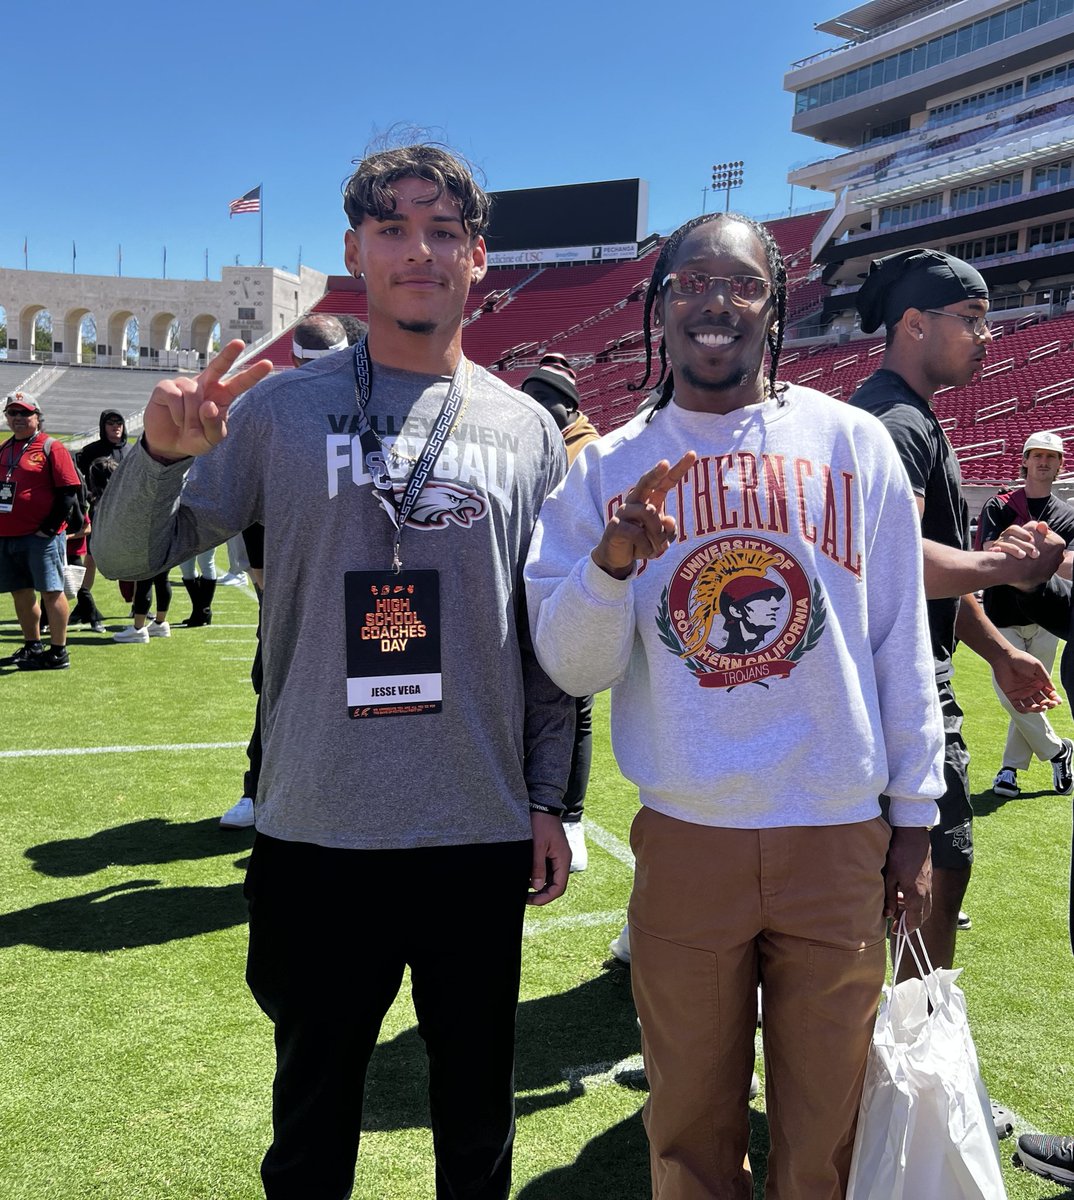 USC spring practice this past weekend. High energy and fast tempo. Looking forward to the Spring Game on the 20th. @Doug_Belk @CoachNua @LincolnRiley @uscfb @AnnieHanson_ @DaGman7 @skylarGphan @ReierSavannah #USC #uscfootball #FightOn